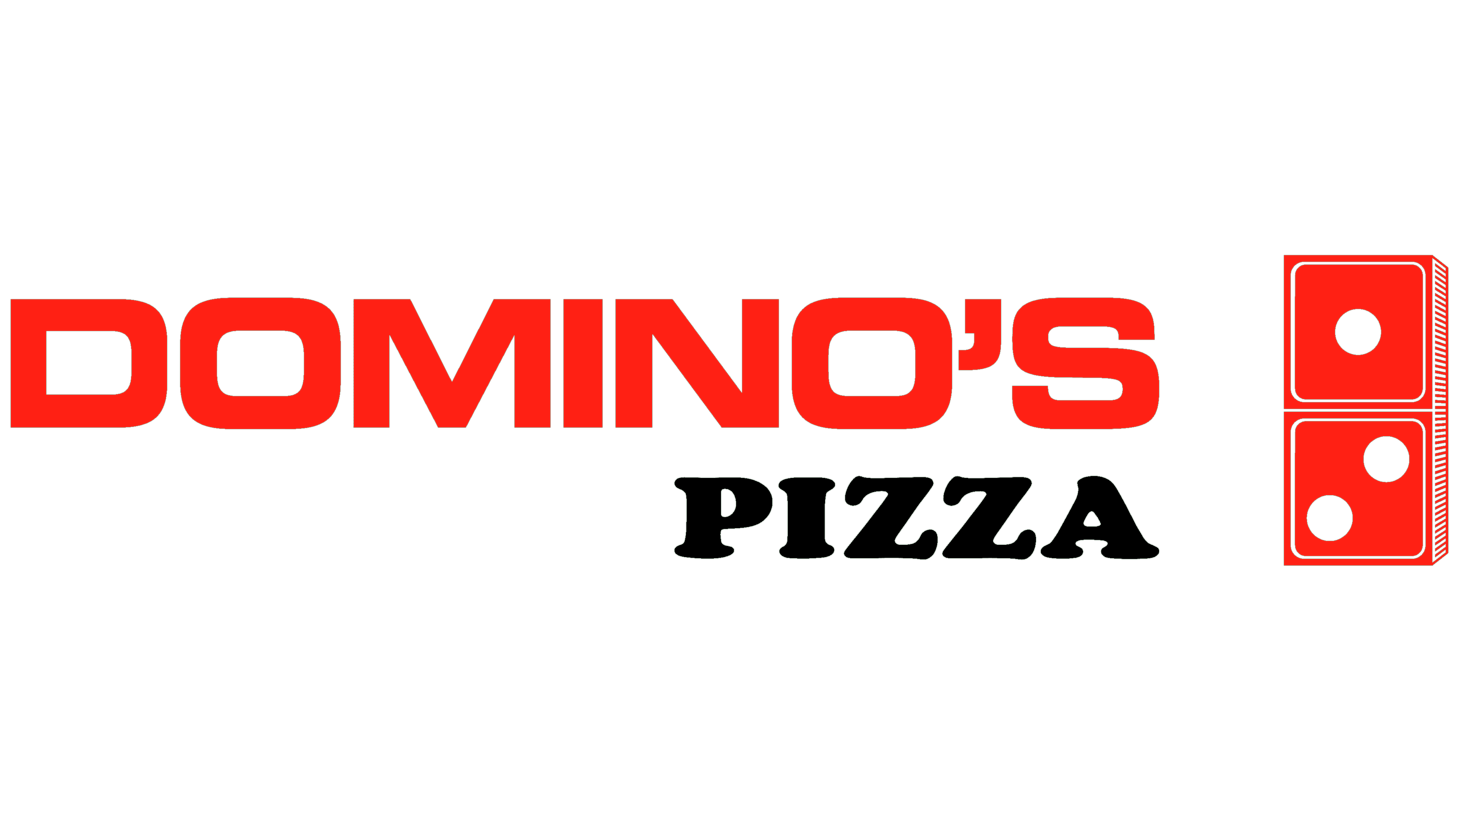 Dominos pizza sign 1965 1969